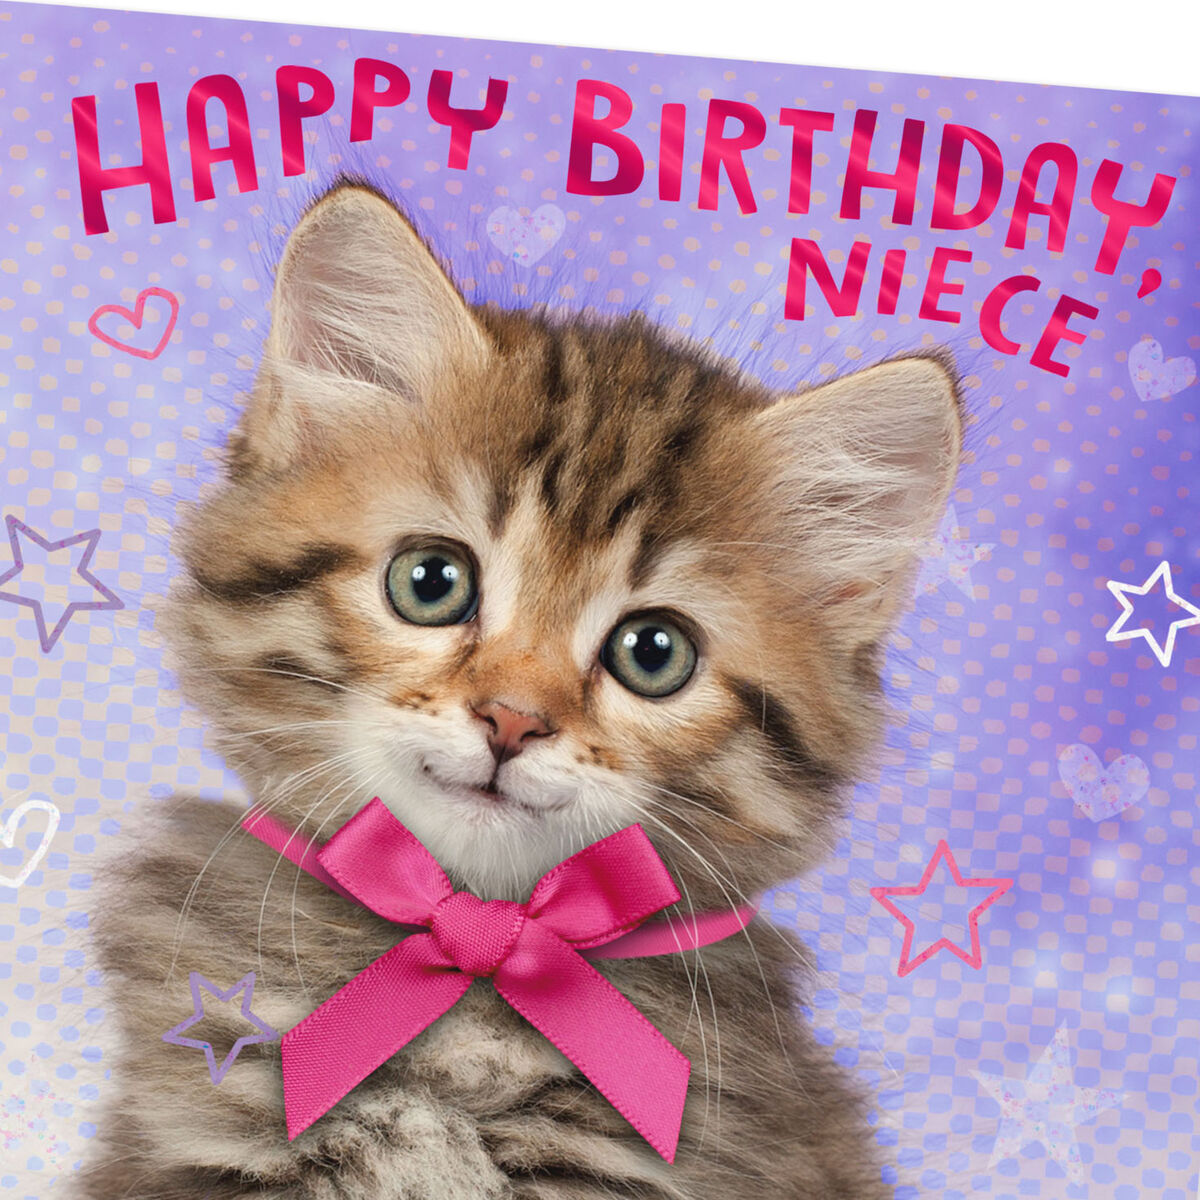 Cuddly Kitten With Bow Birthday Card for Niece - Greeting Cards - Hallmark